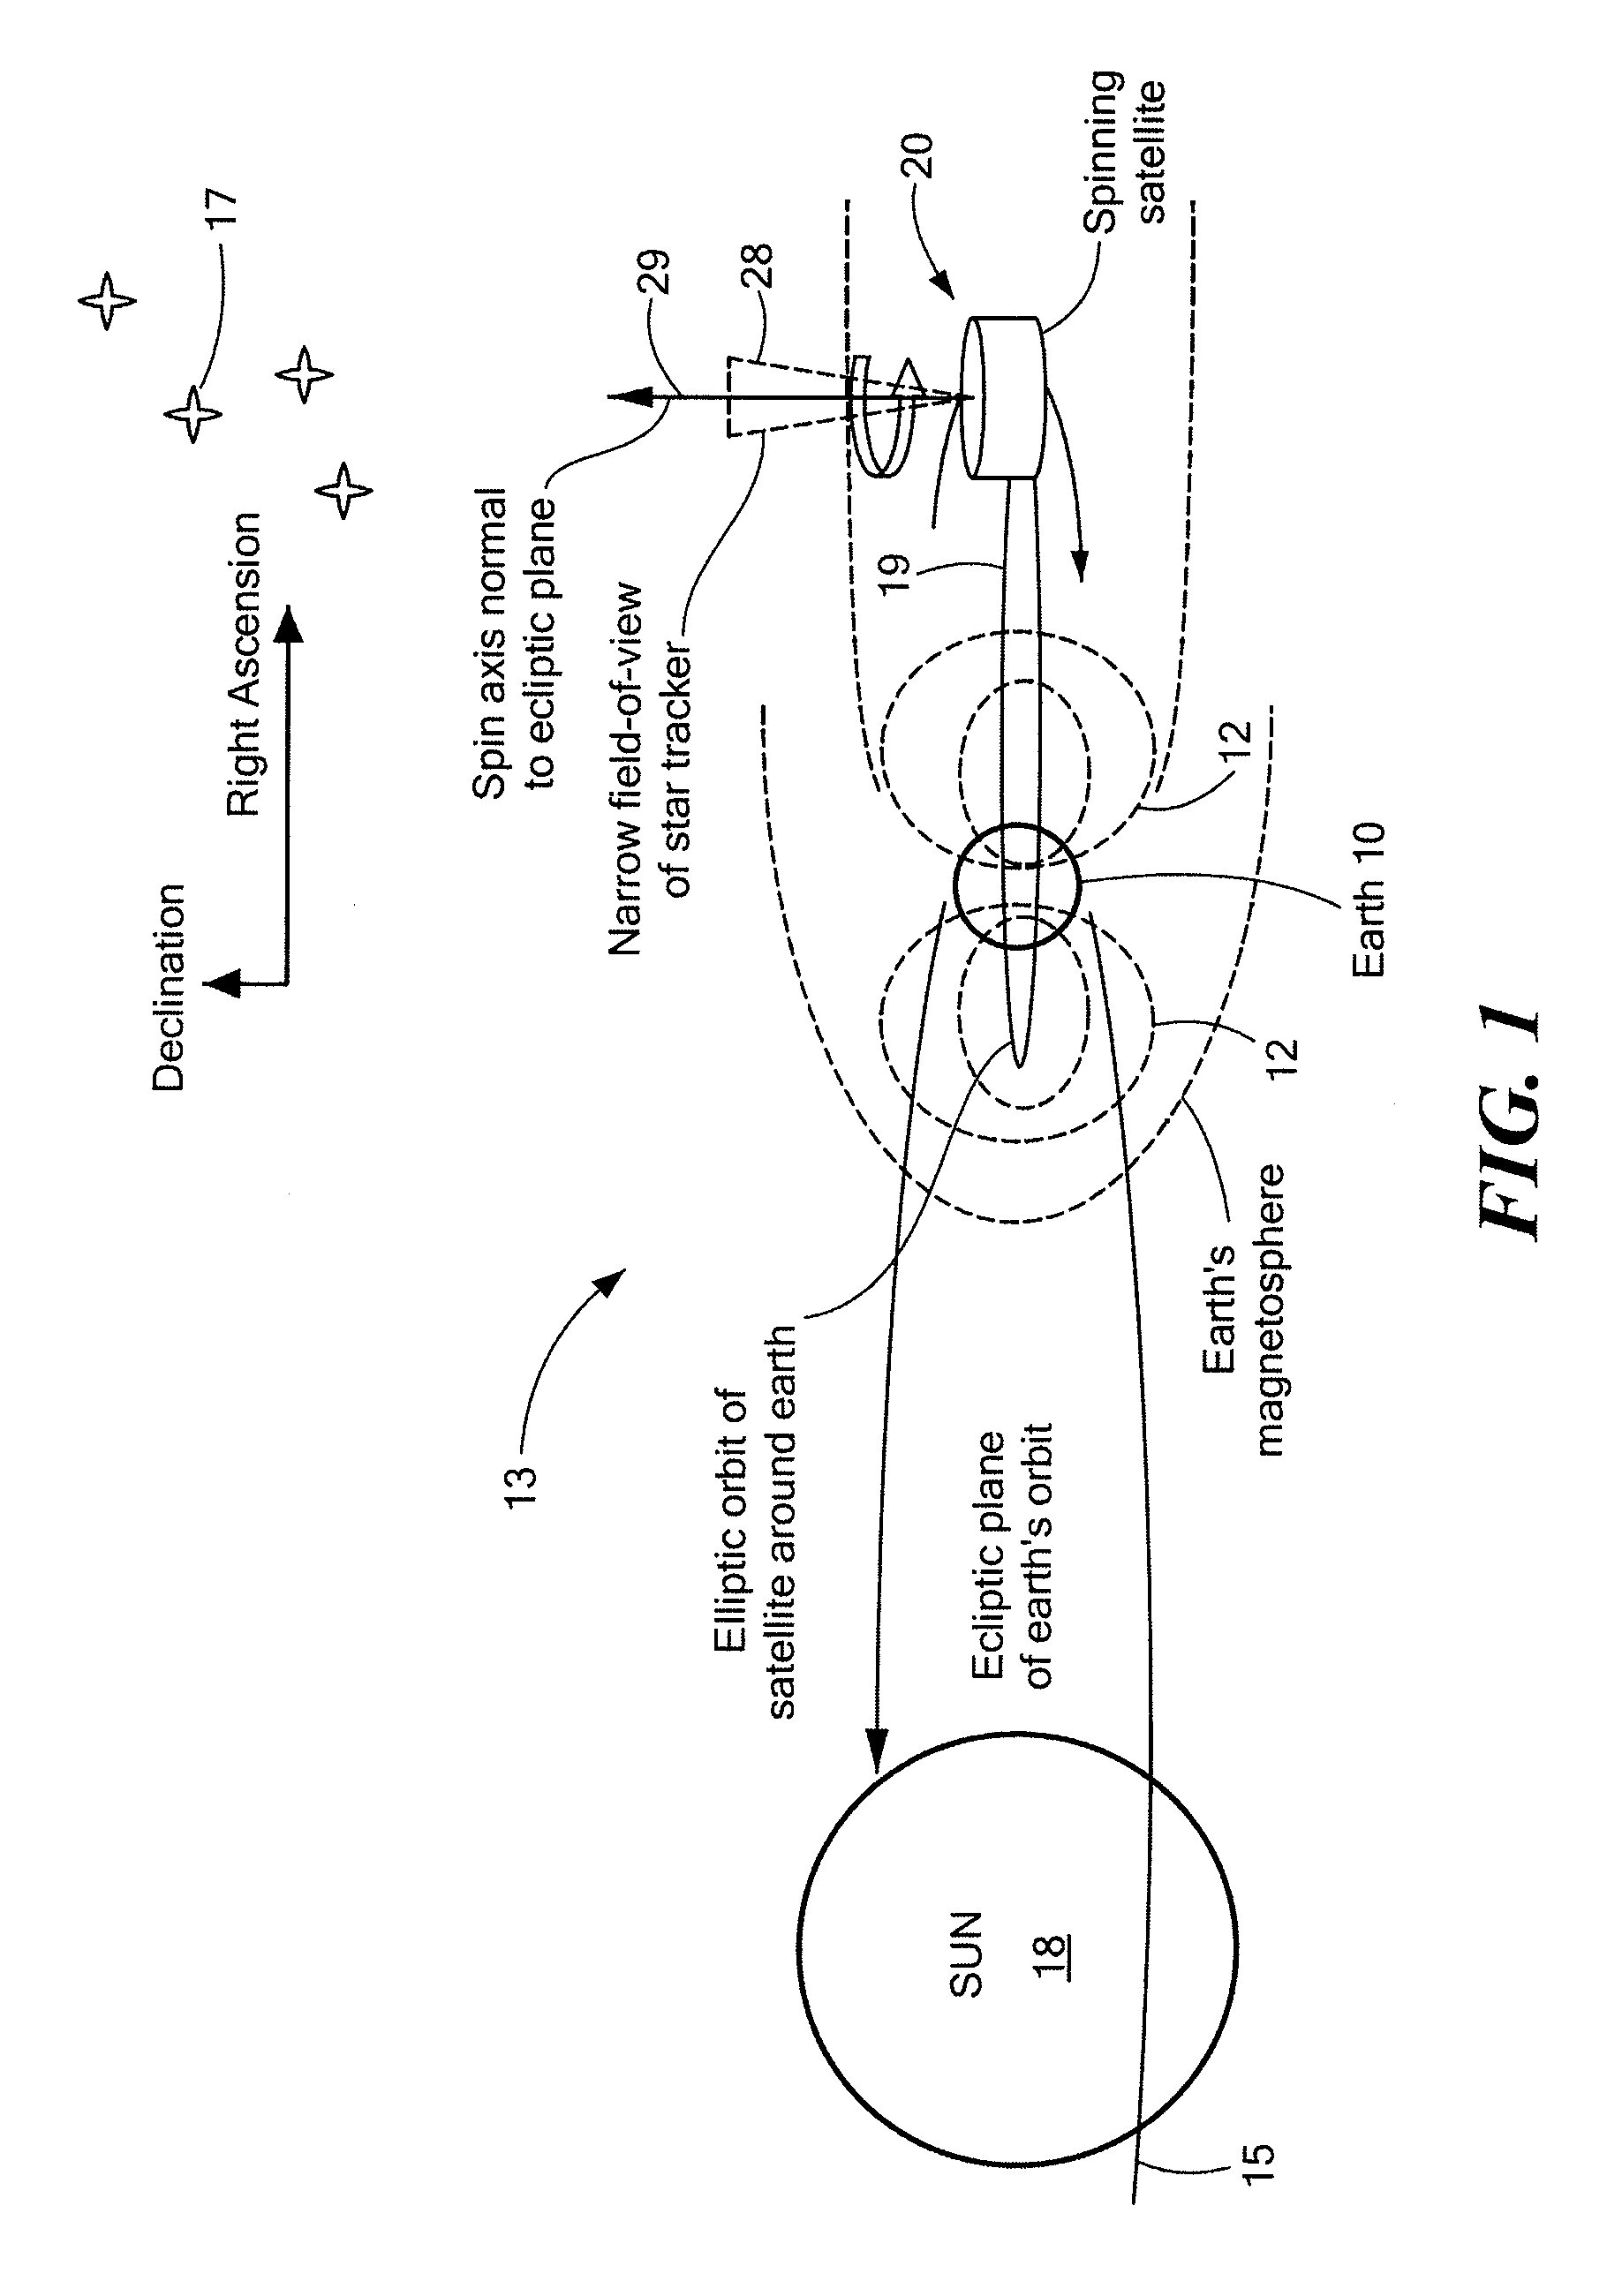 Method of determining and controlling the inertial attitude of a spinning, artificial satellite and systems therefor